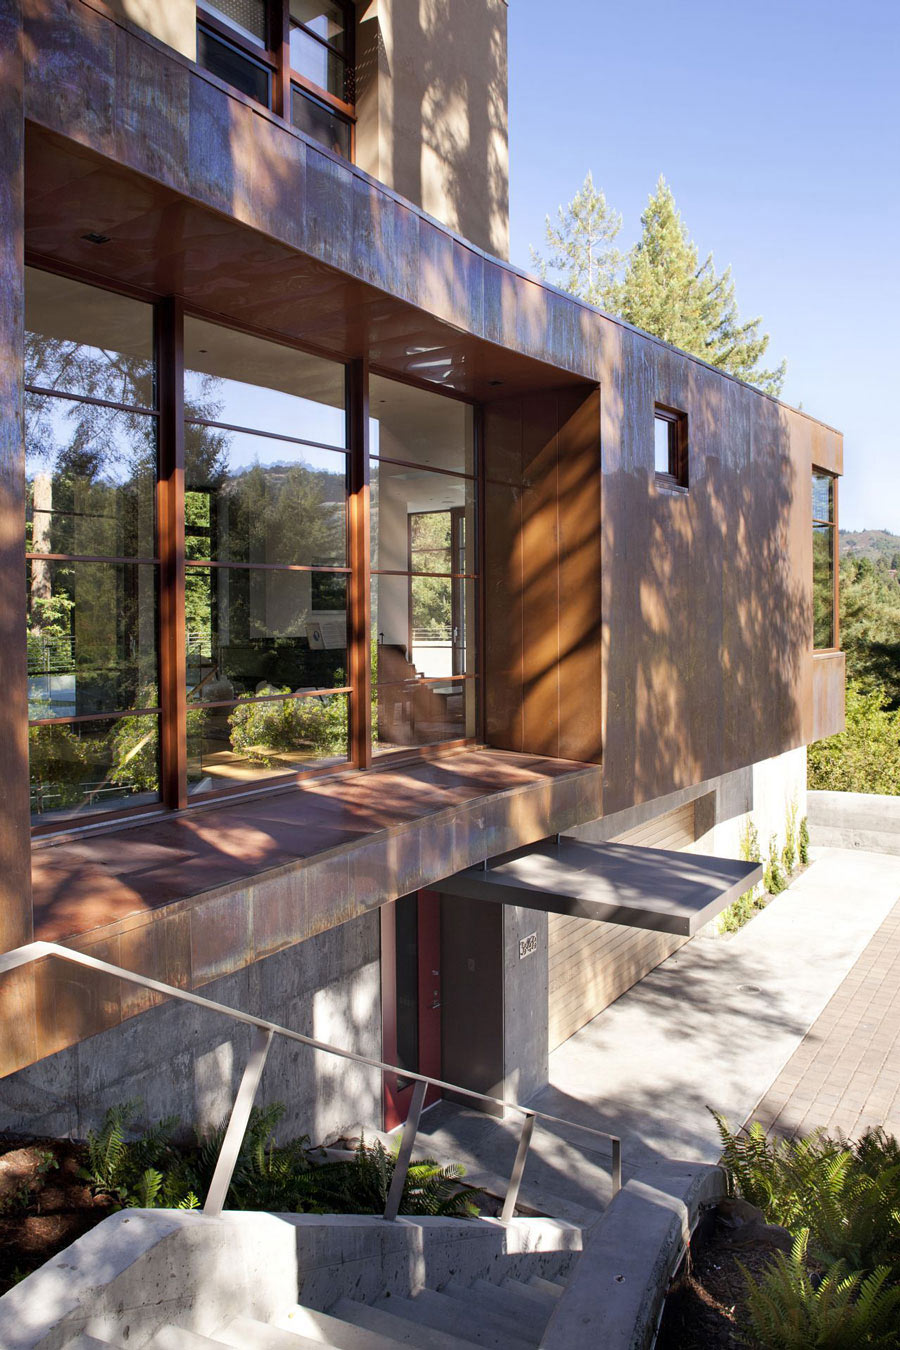 Concrete Stairs, Entrance, Impressive House in Marin, California